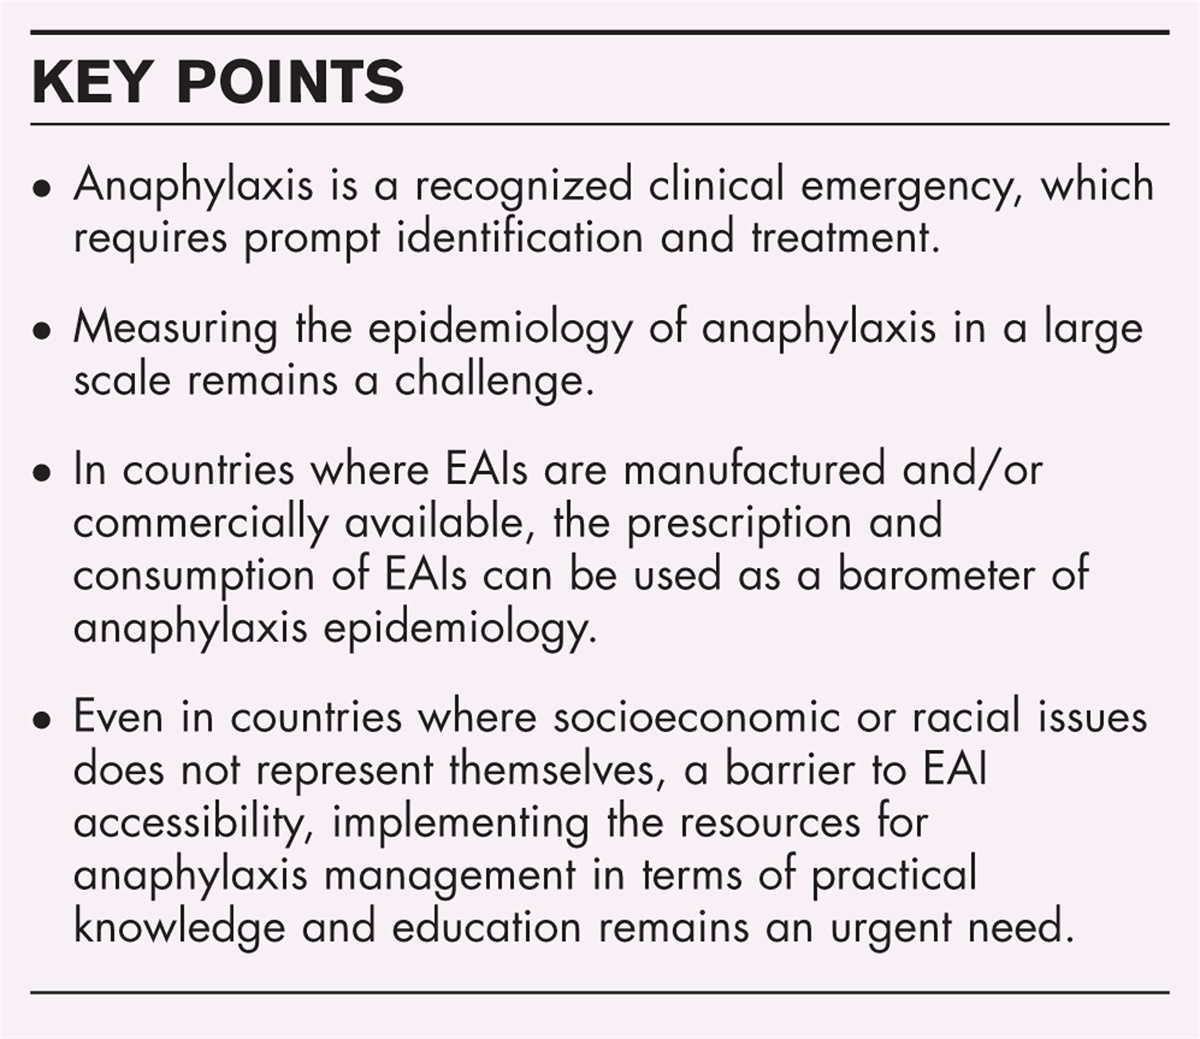 Trends and determinants of epinephrine prescriptions: a proxy of anaphylaxis epidemiology?